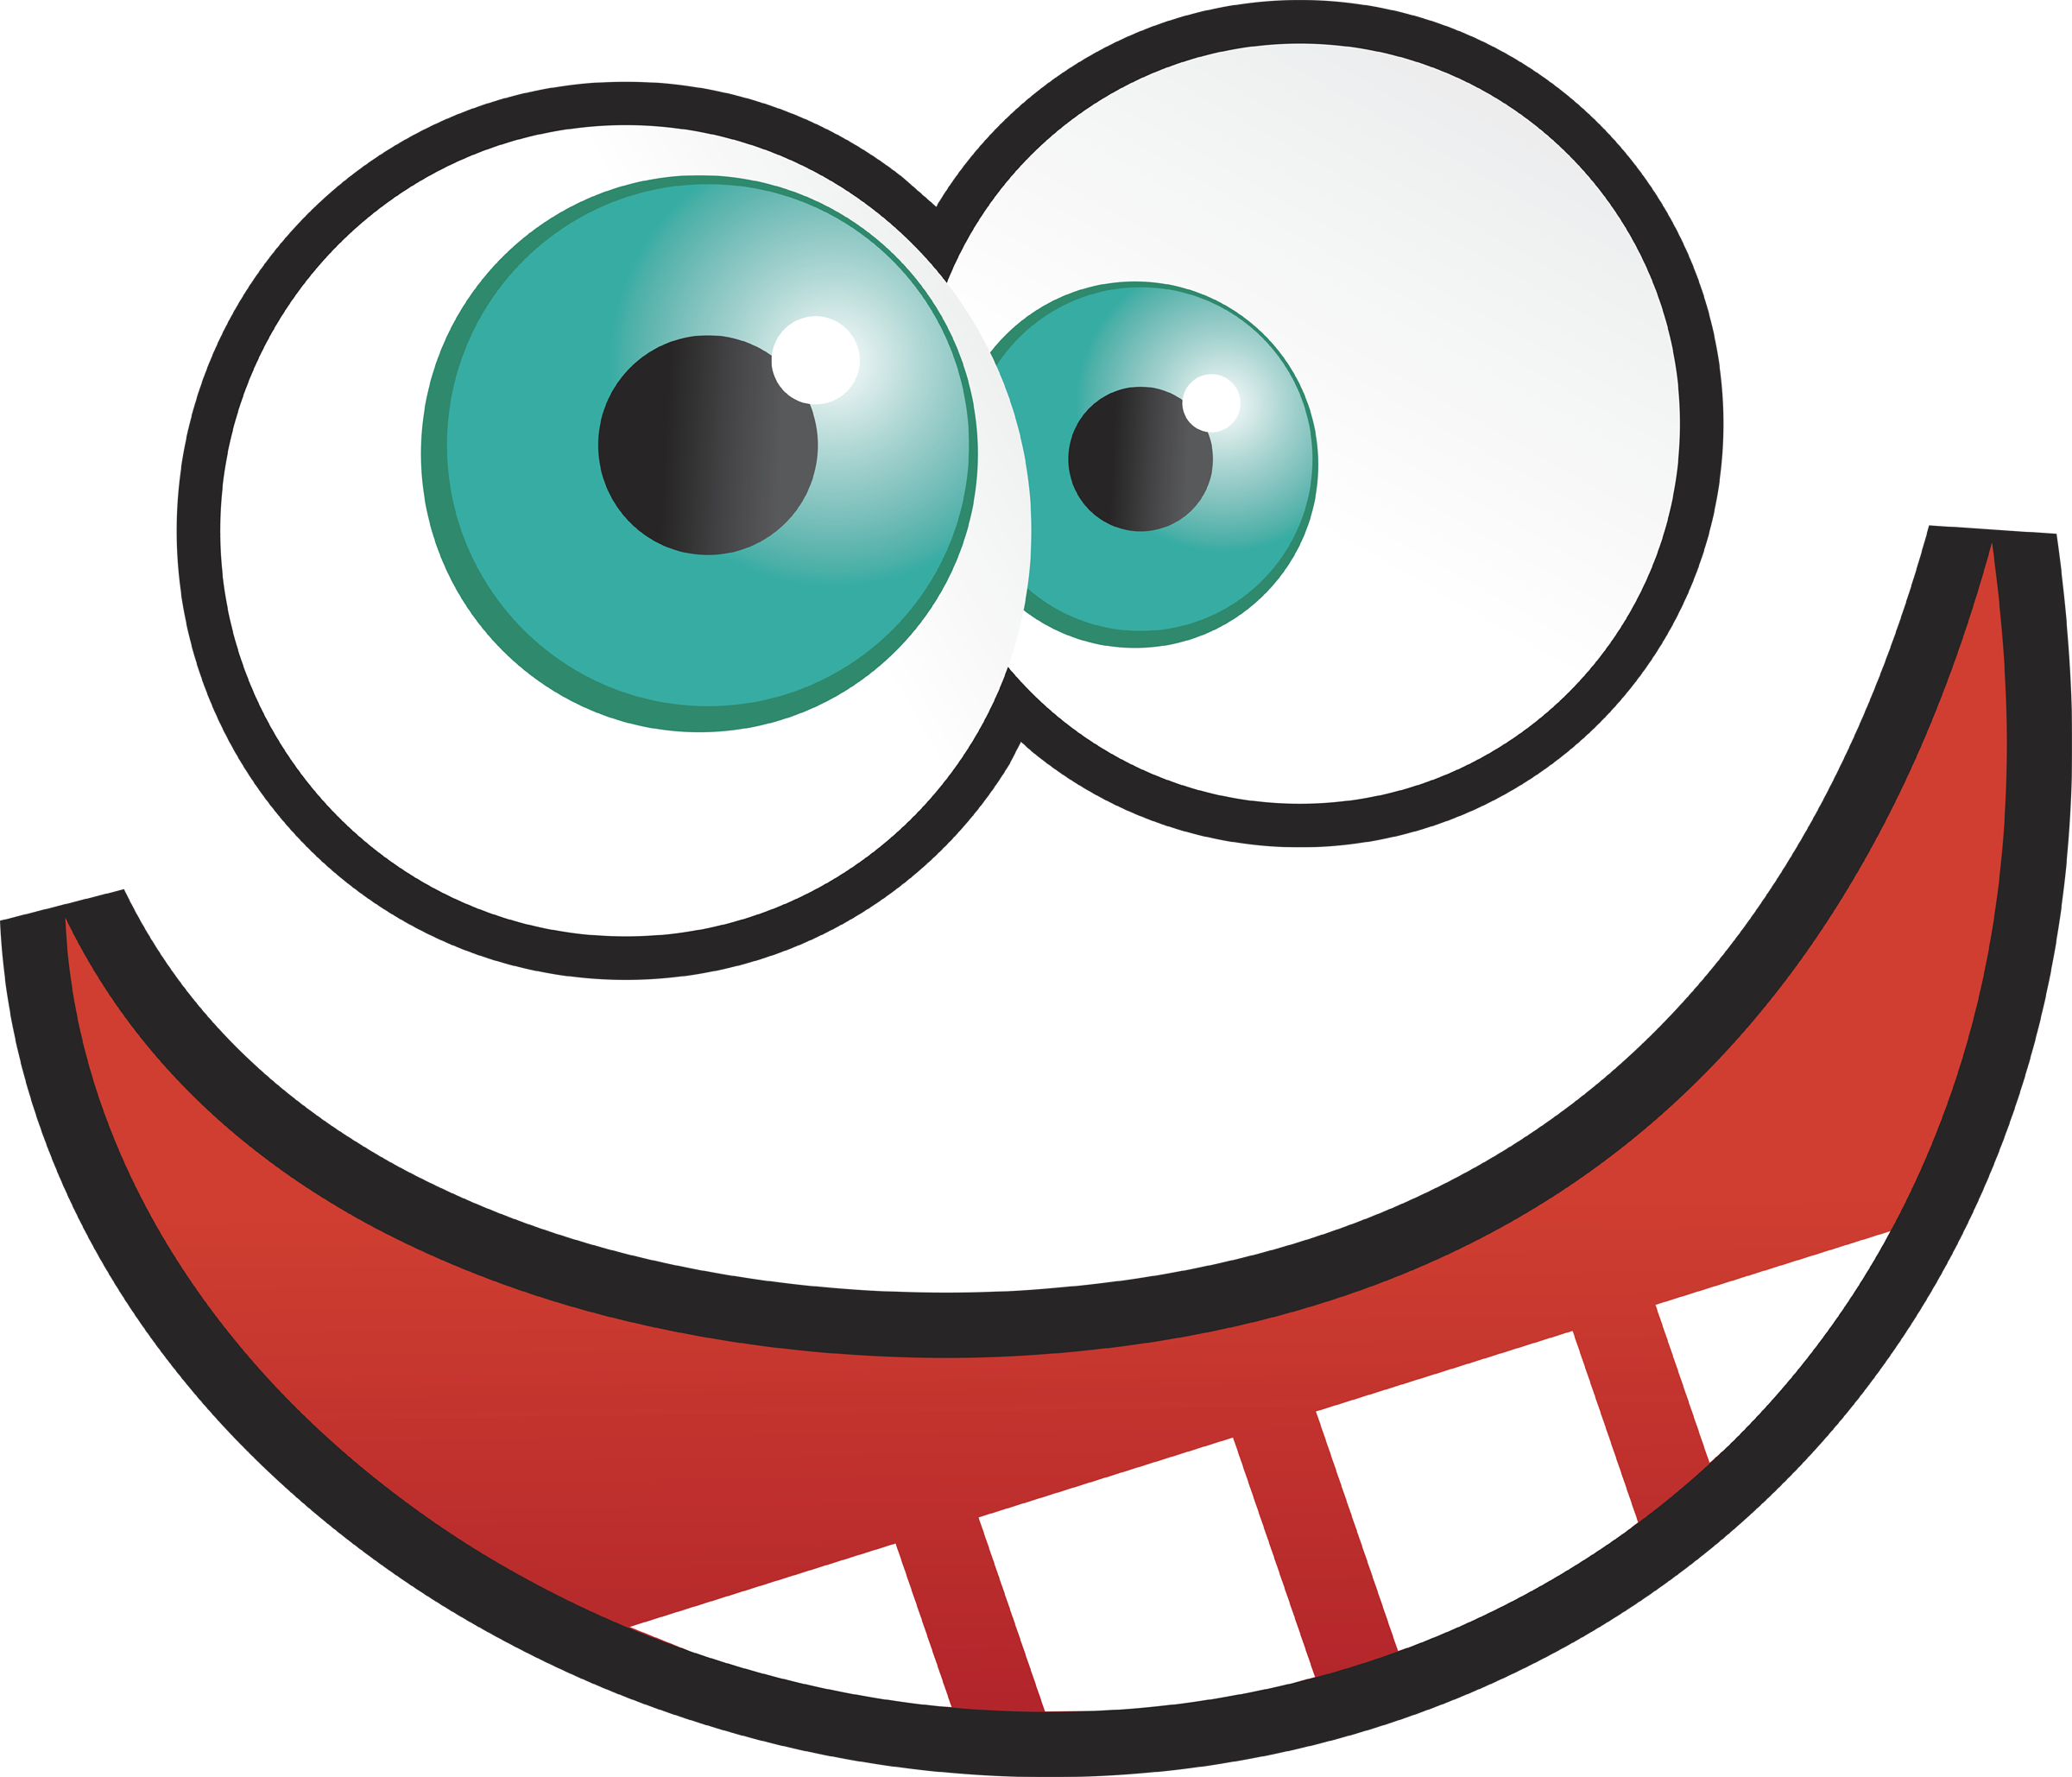 Funny Laughing Face Cartoon